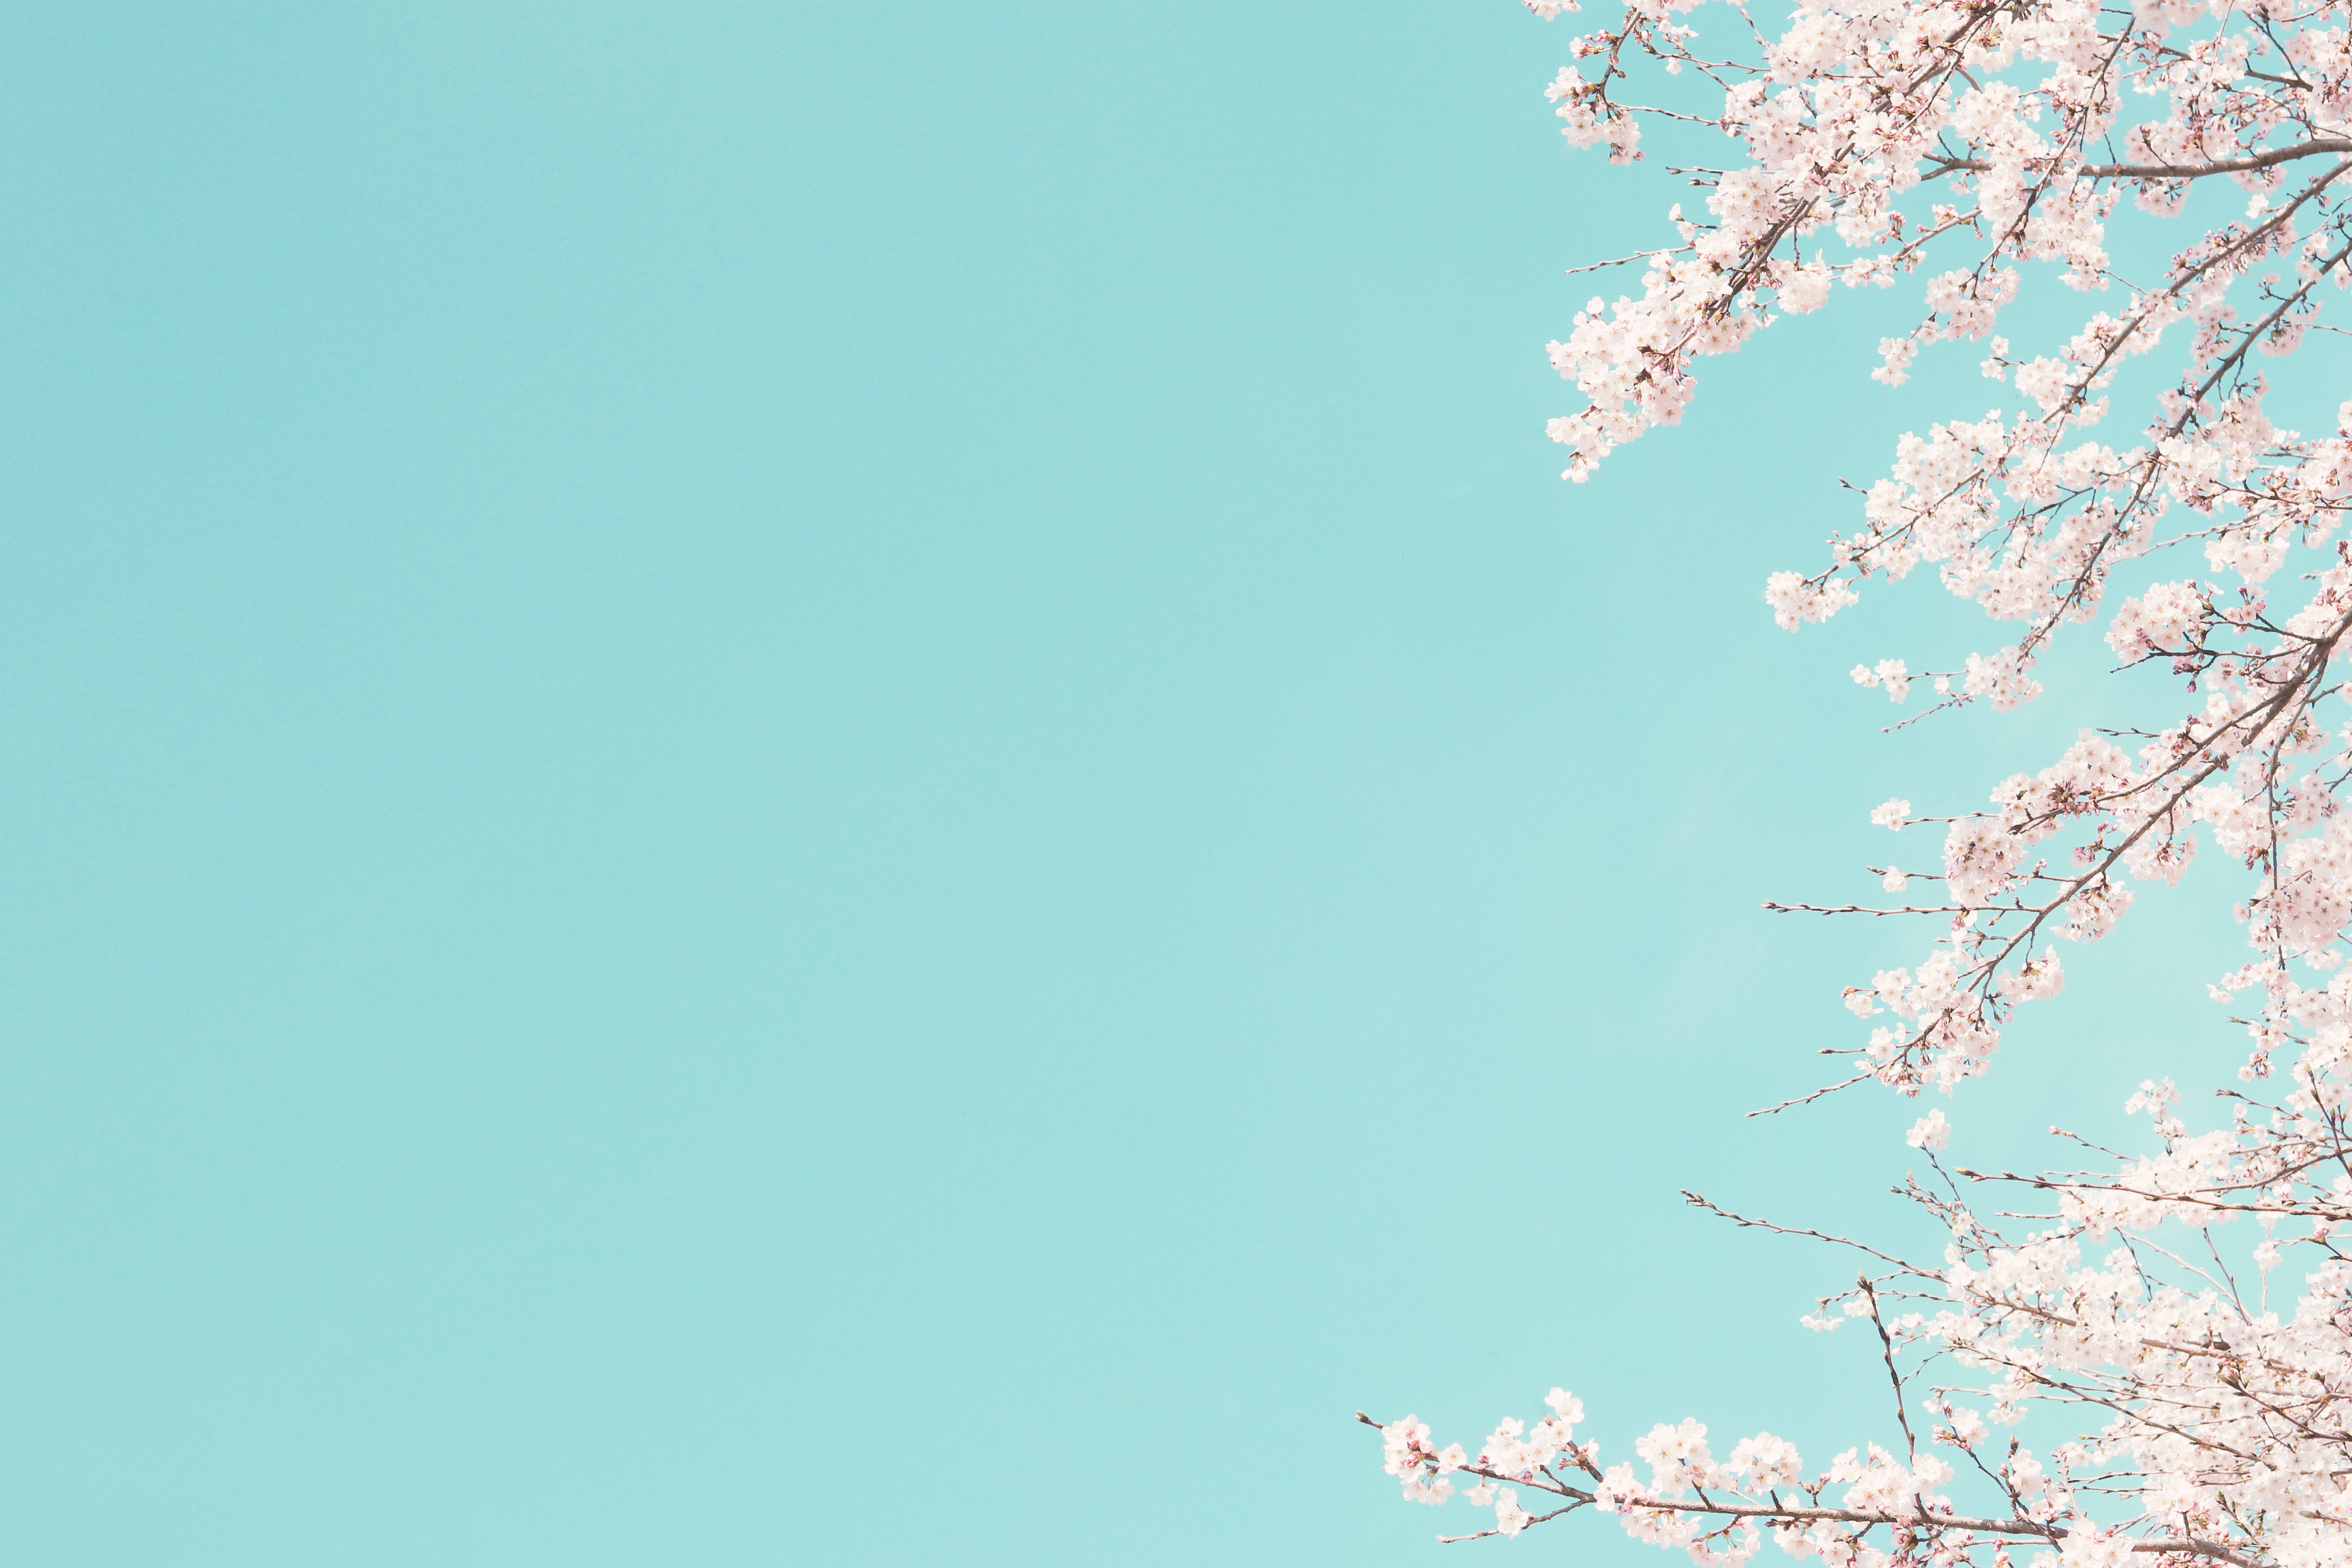 picture of light blue sky with branches full of light pink cherry blossoms on the right side of the image